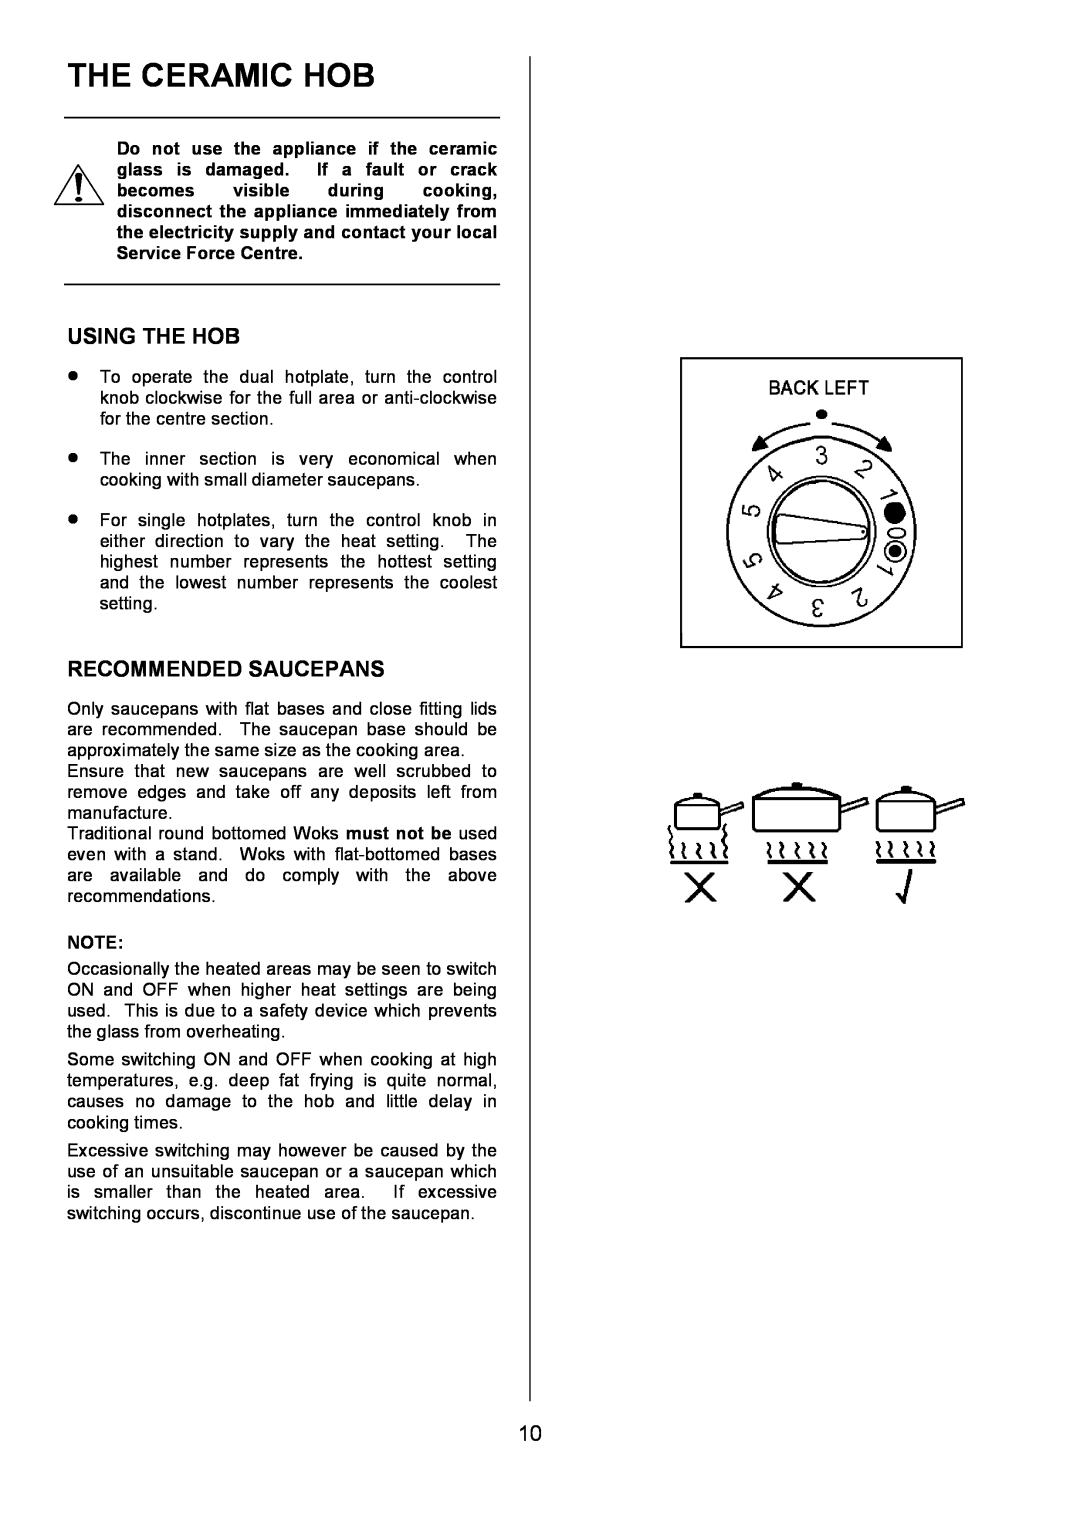 Zanussi ZCE 7680, ZCE 7690 manual The Ceramic Hob, Using The Hob, Recommended Saucepans 